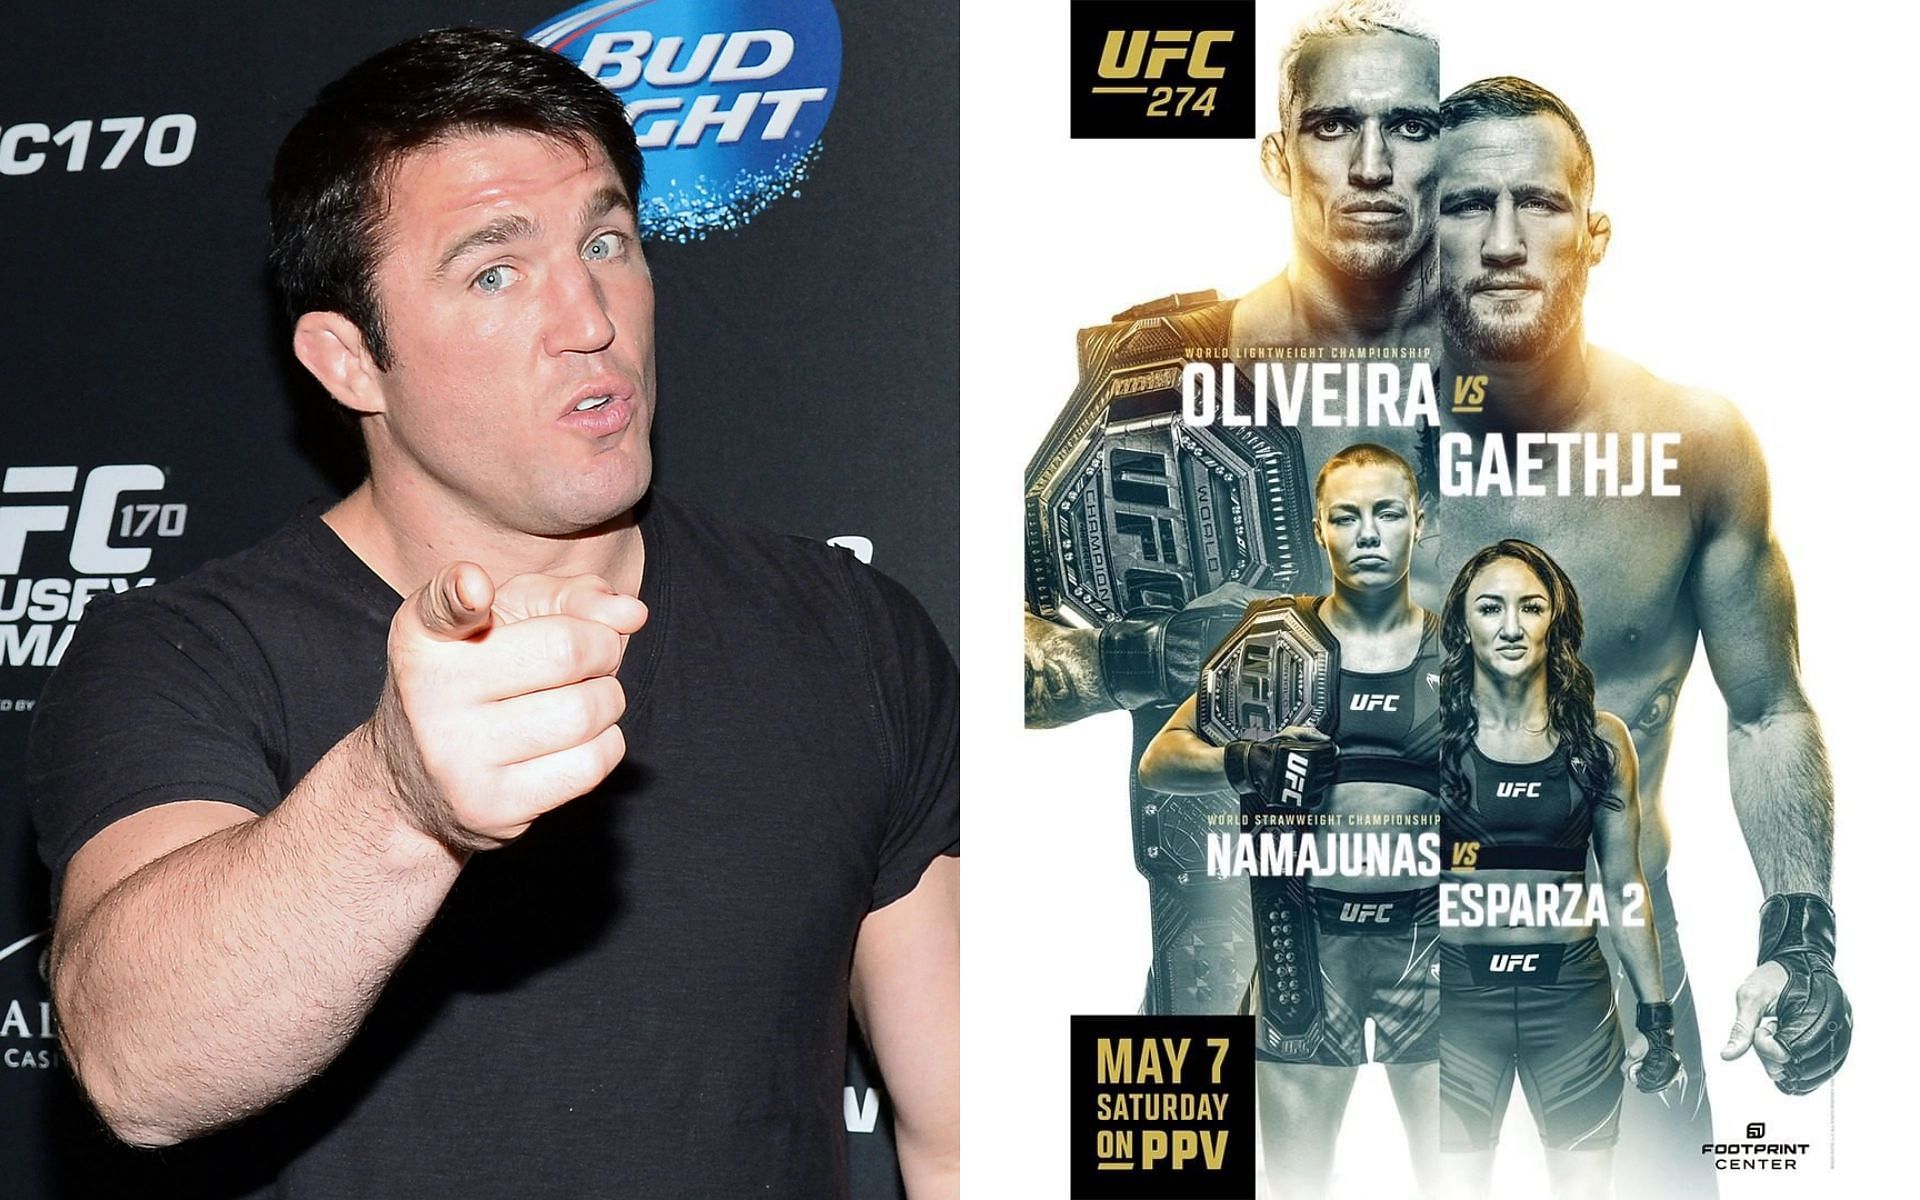 Chael Sonnen (left) and the UFC 274 poster (right) [Images courtesy of Getty and @ufc Instagram]